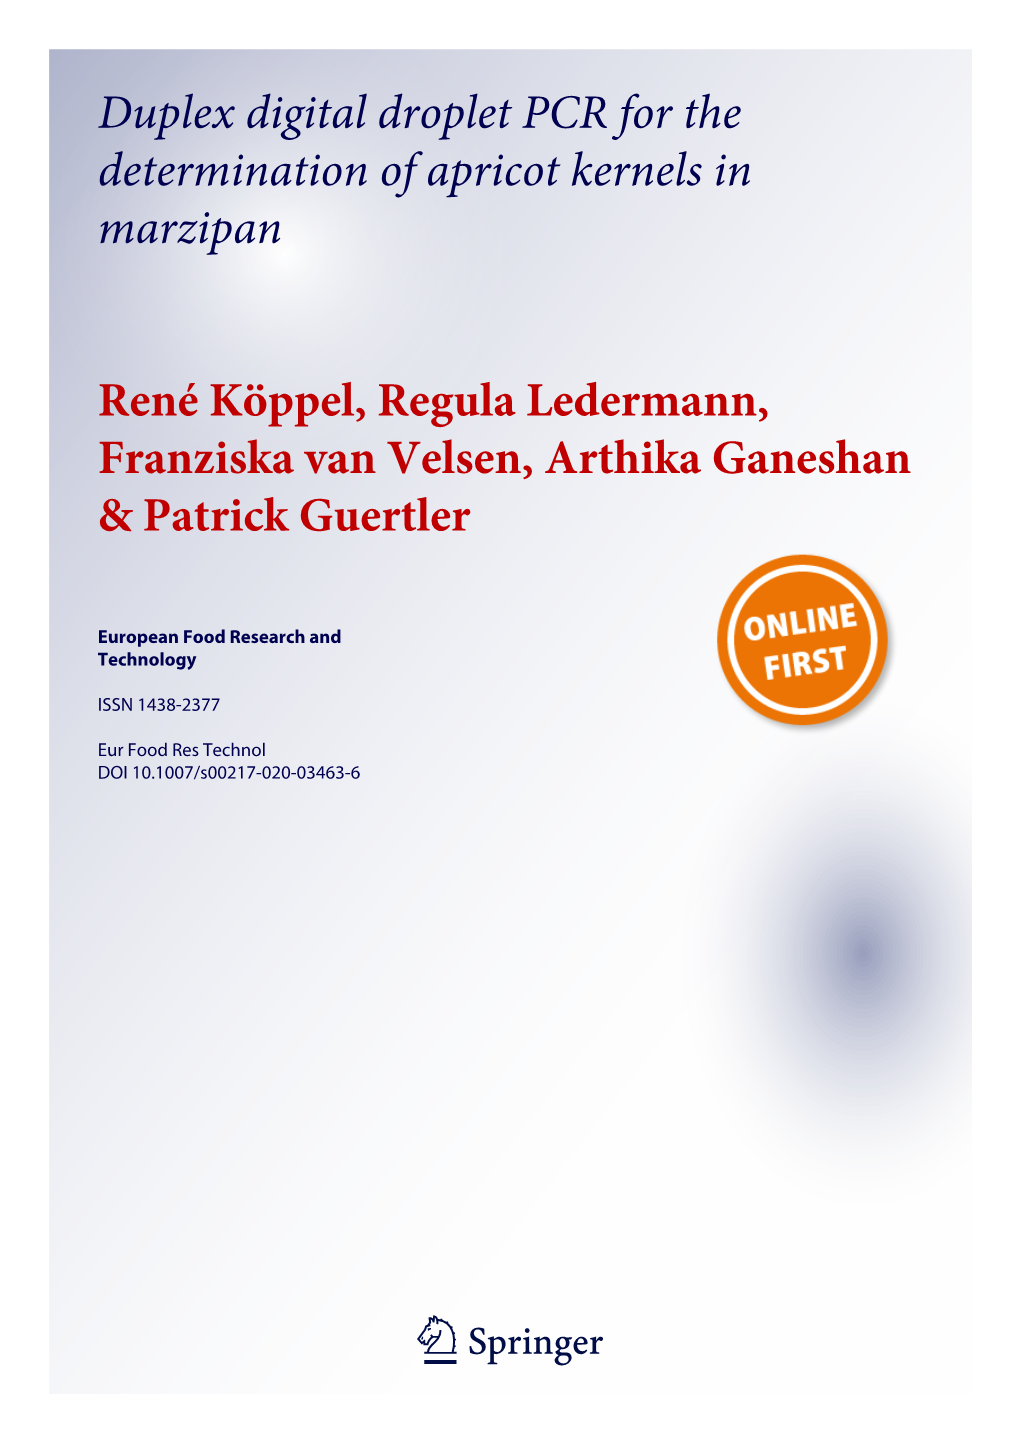 Duplex Digital Droplet PCR for the Determination of Apricot Kernels in Marzipan